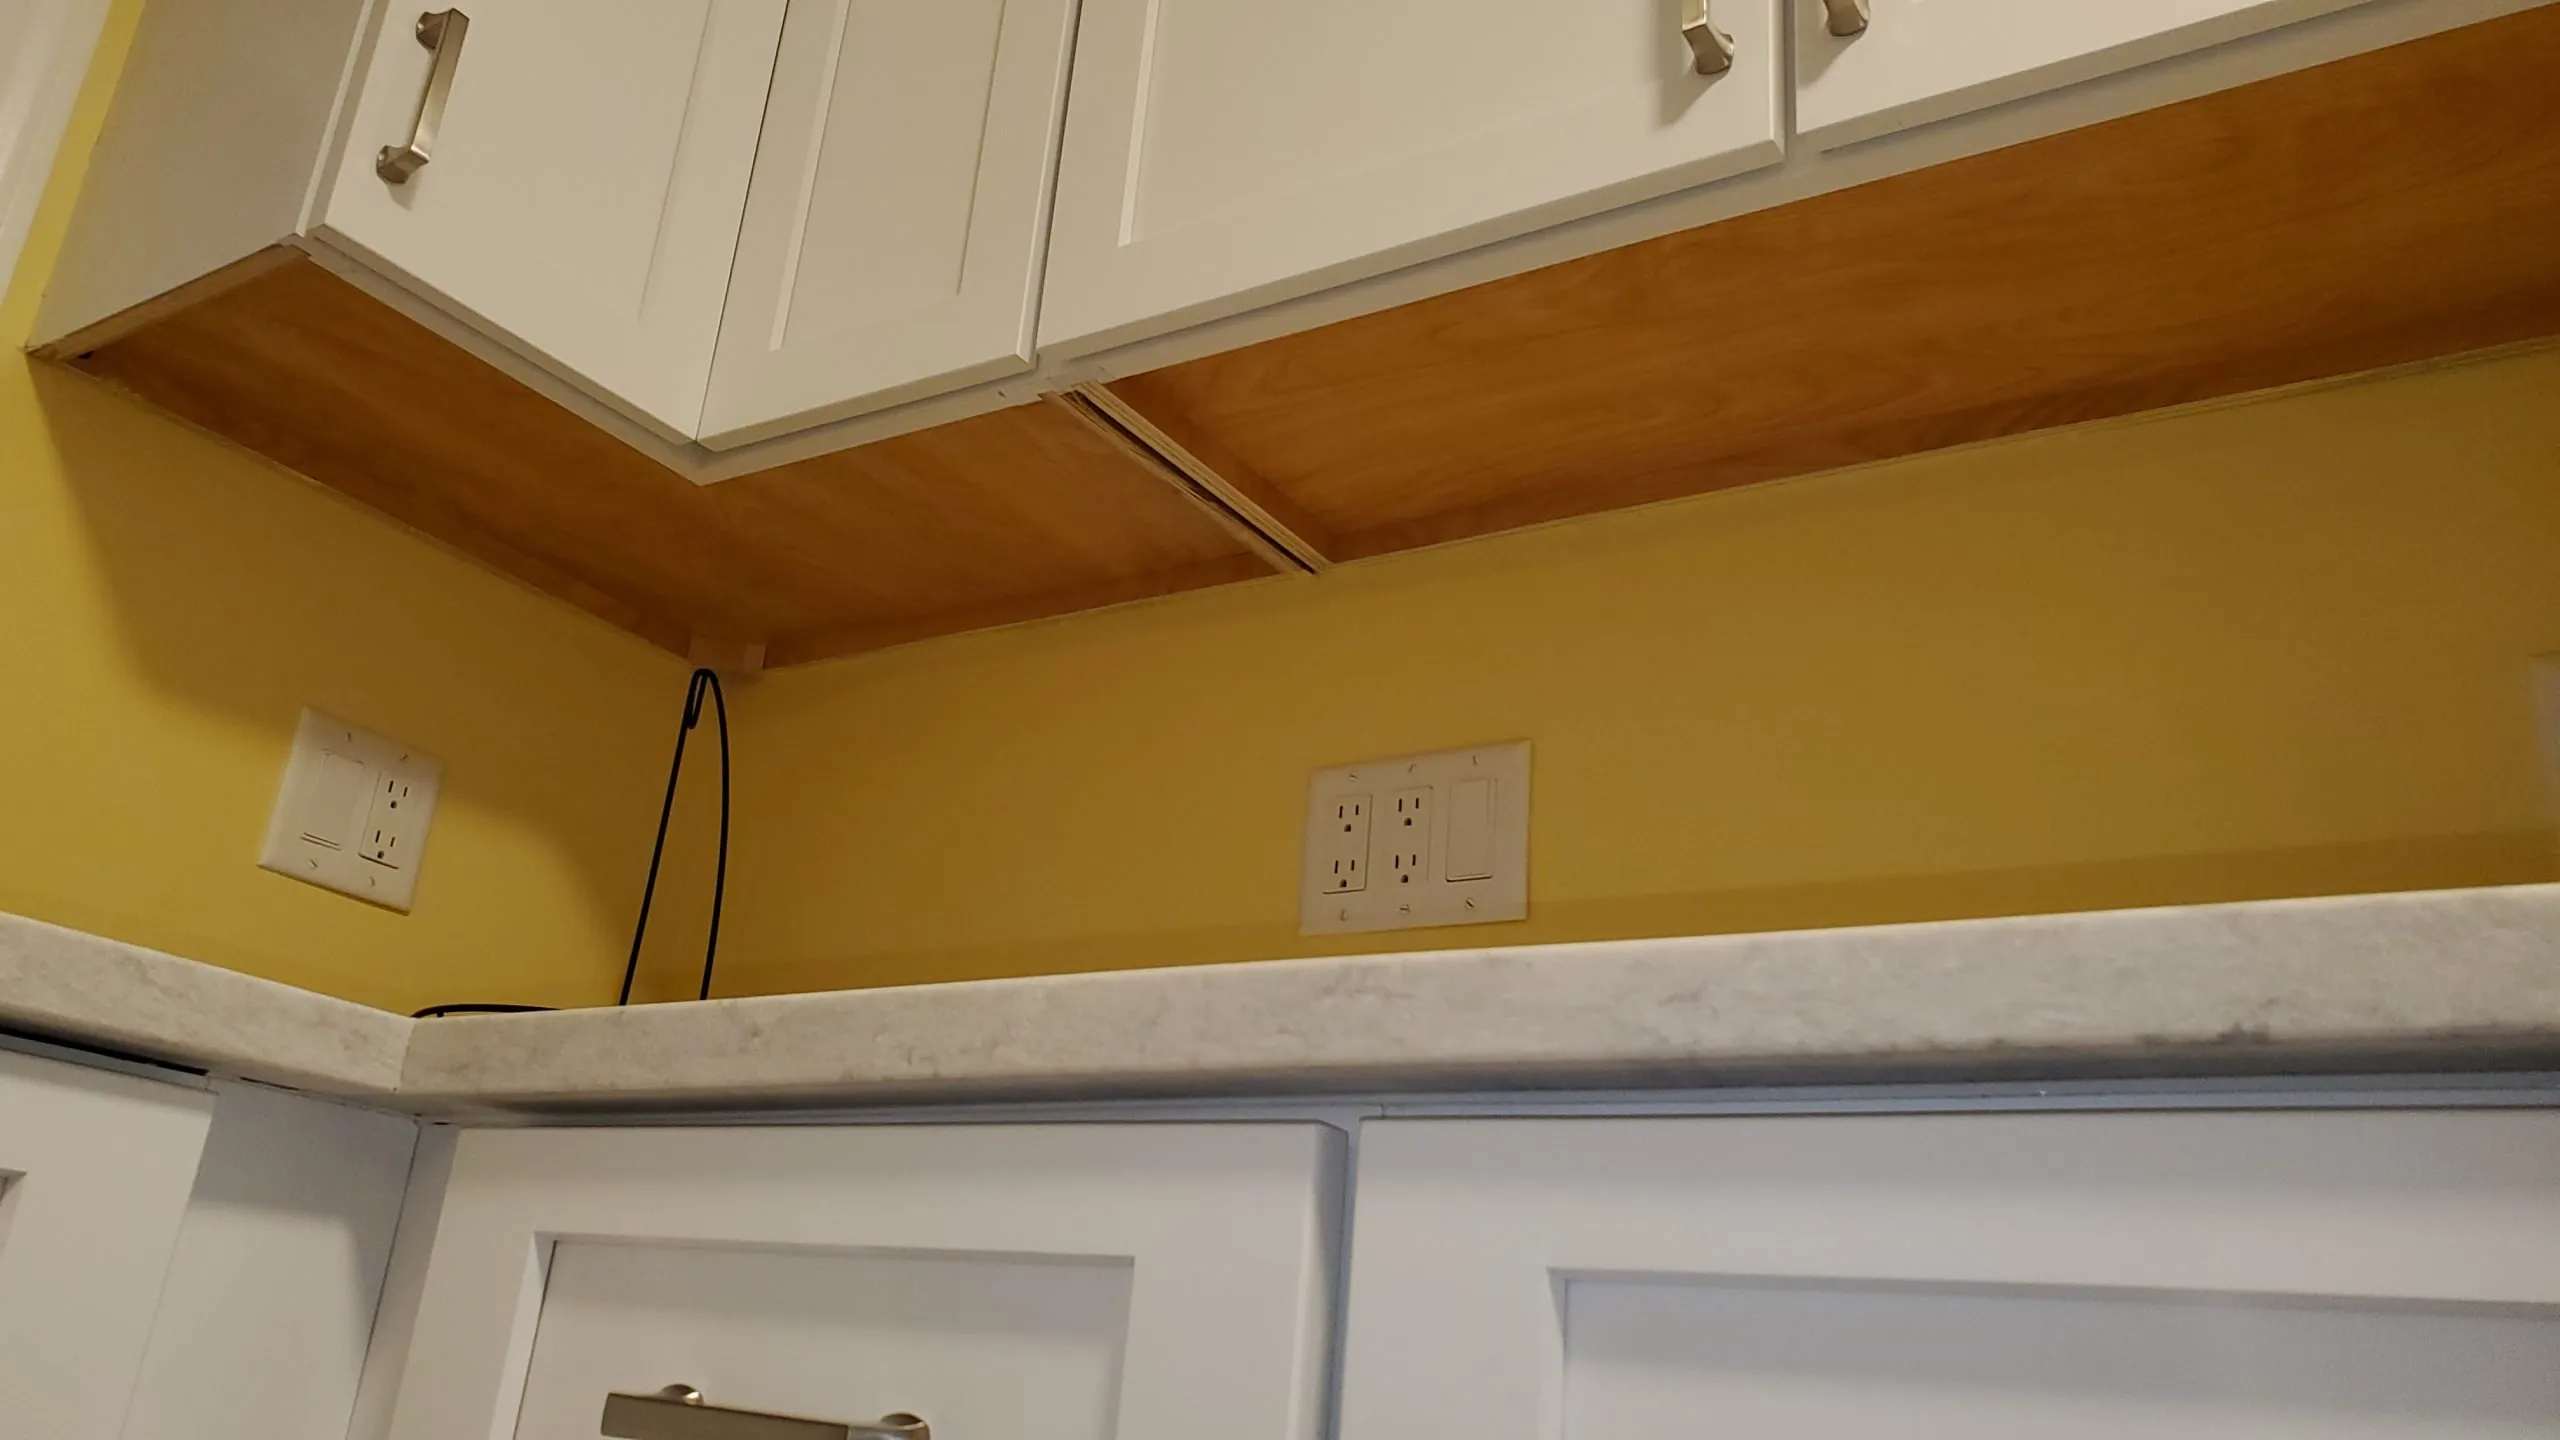 How To Finish Underside Of Kitchen Cabinets?